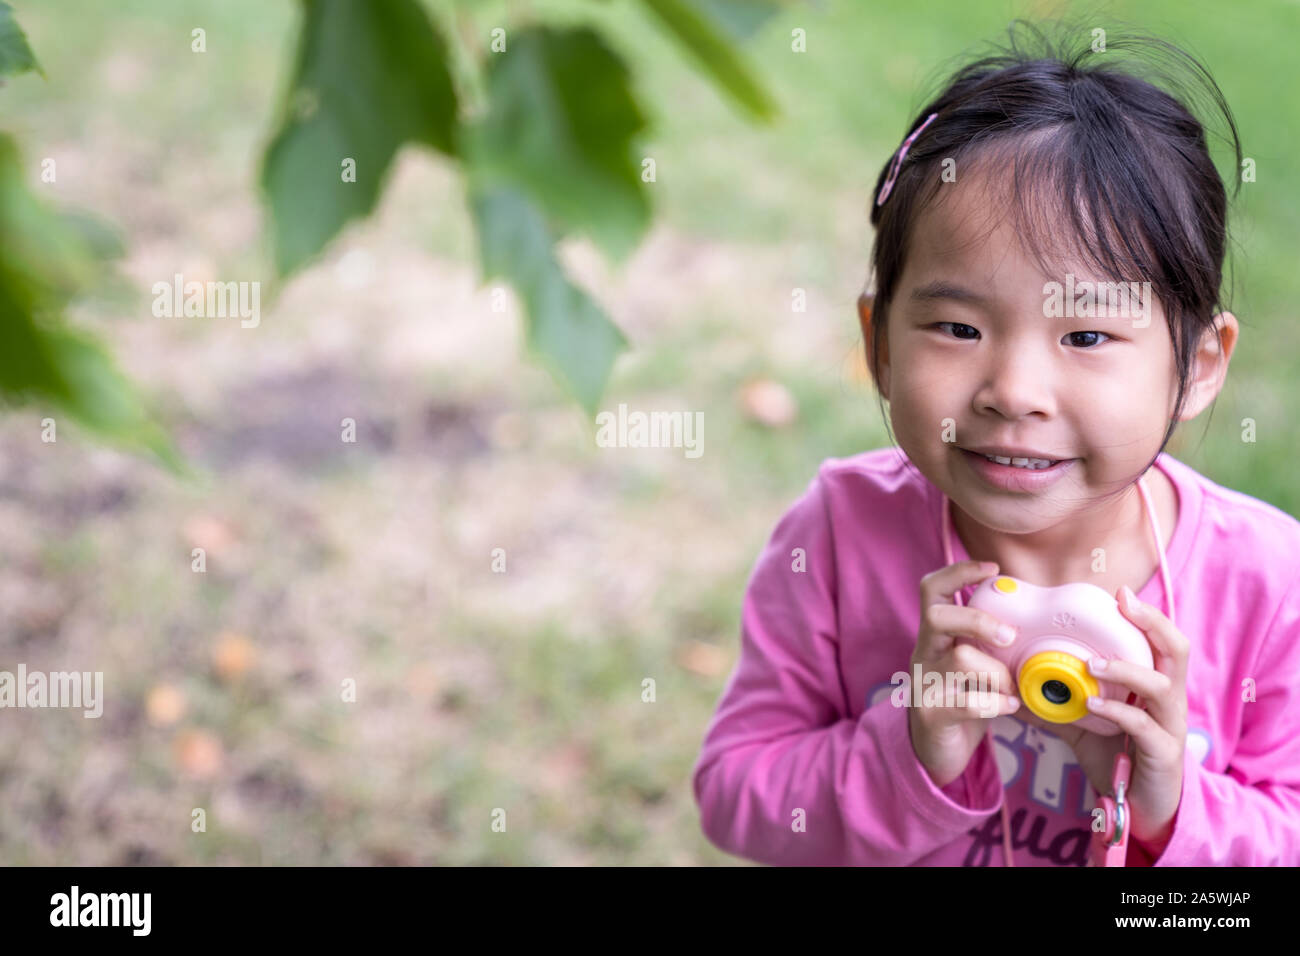 Asian little girl holding a plastic camera toy Stock Photo